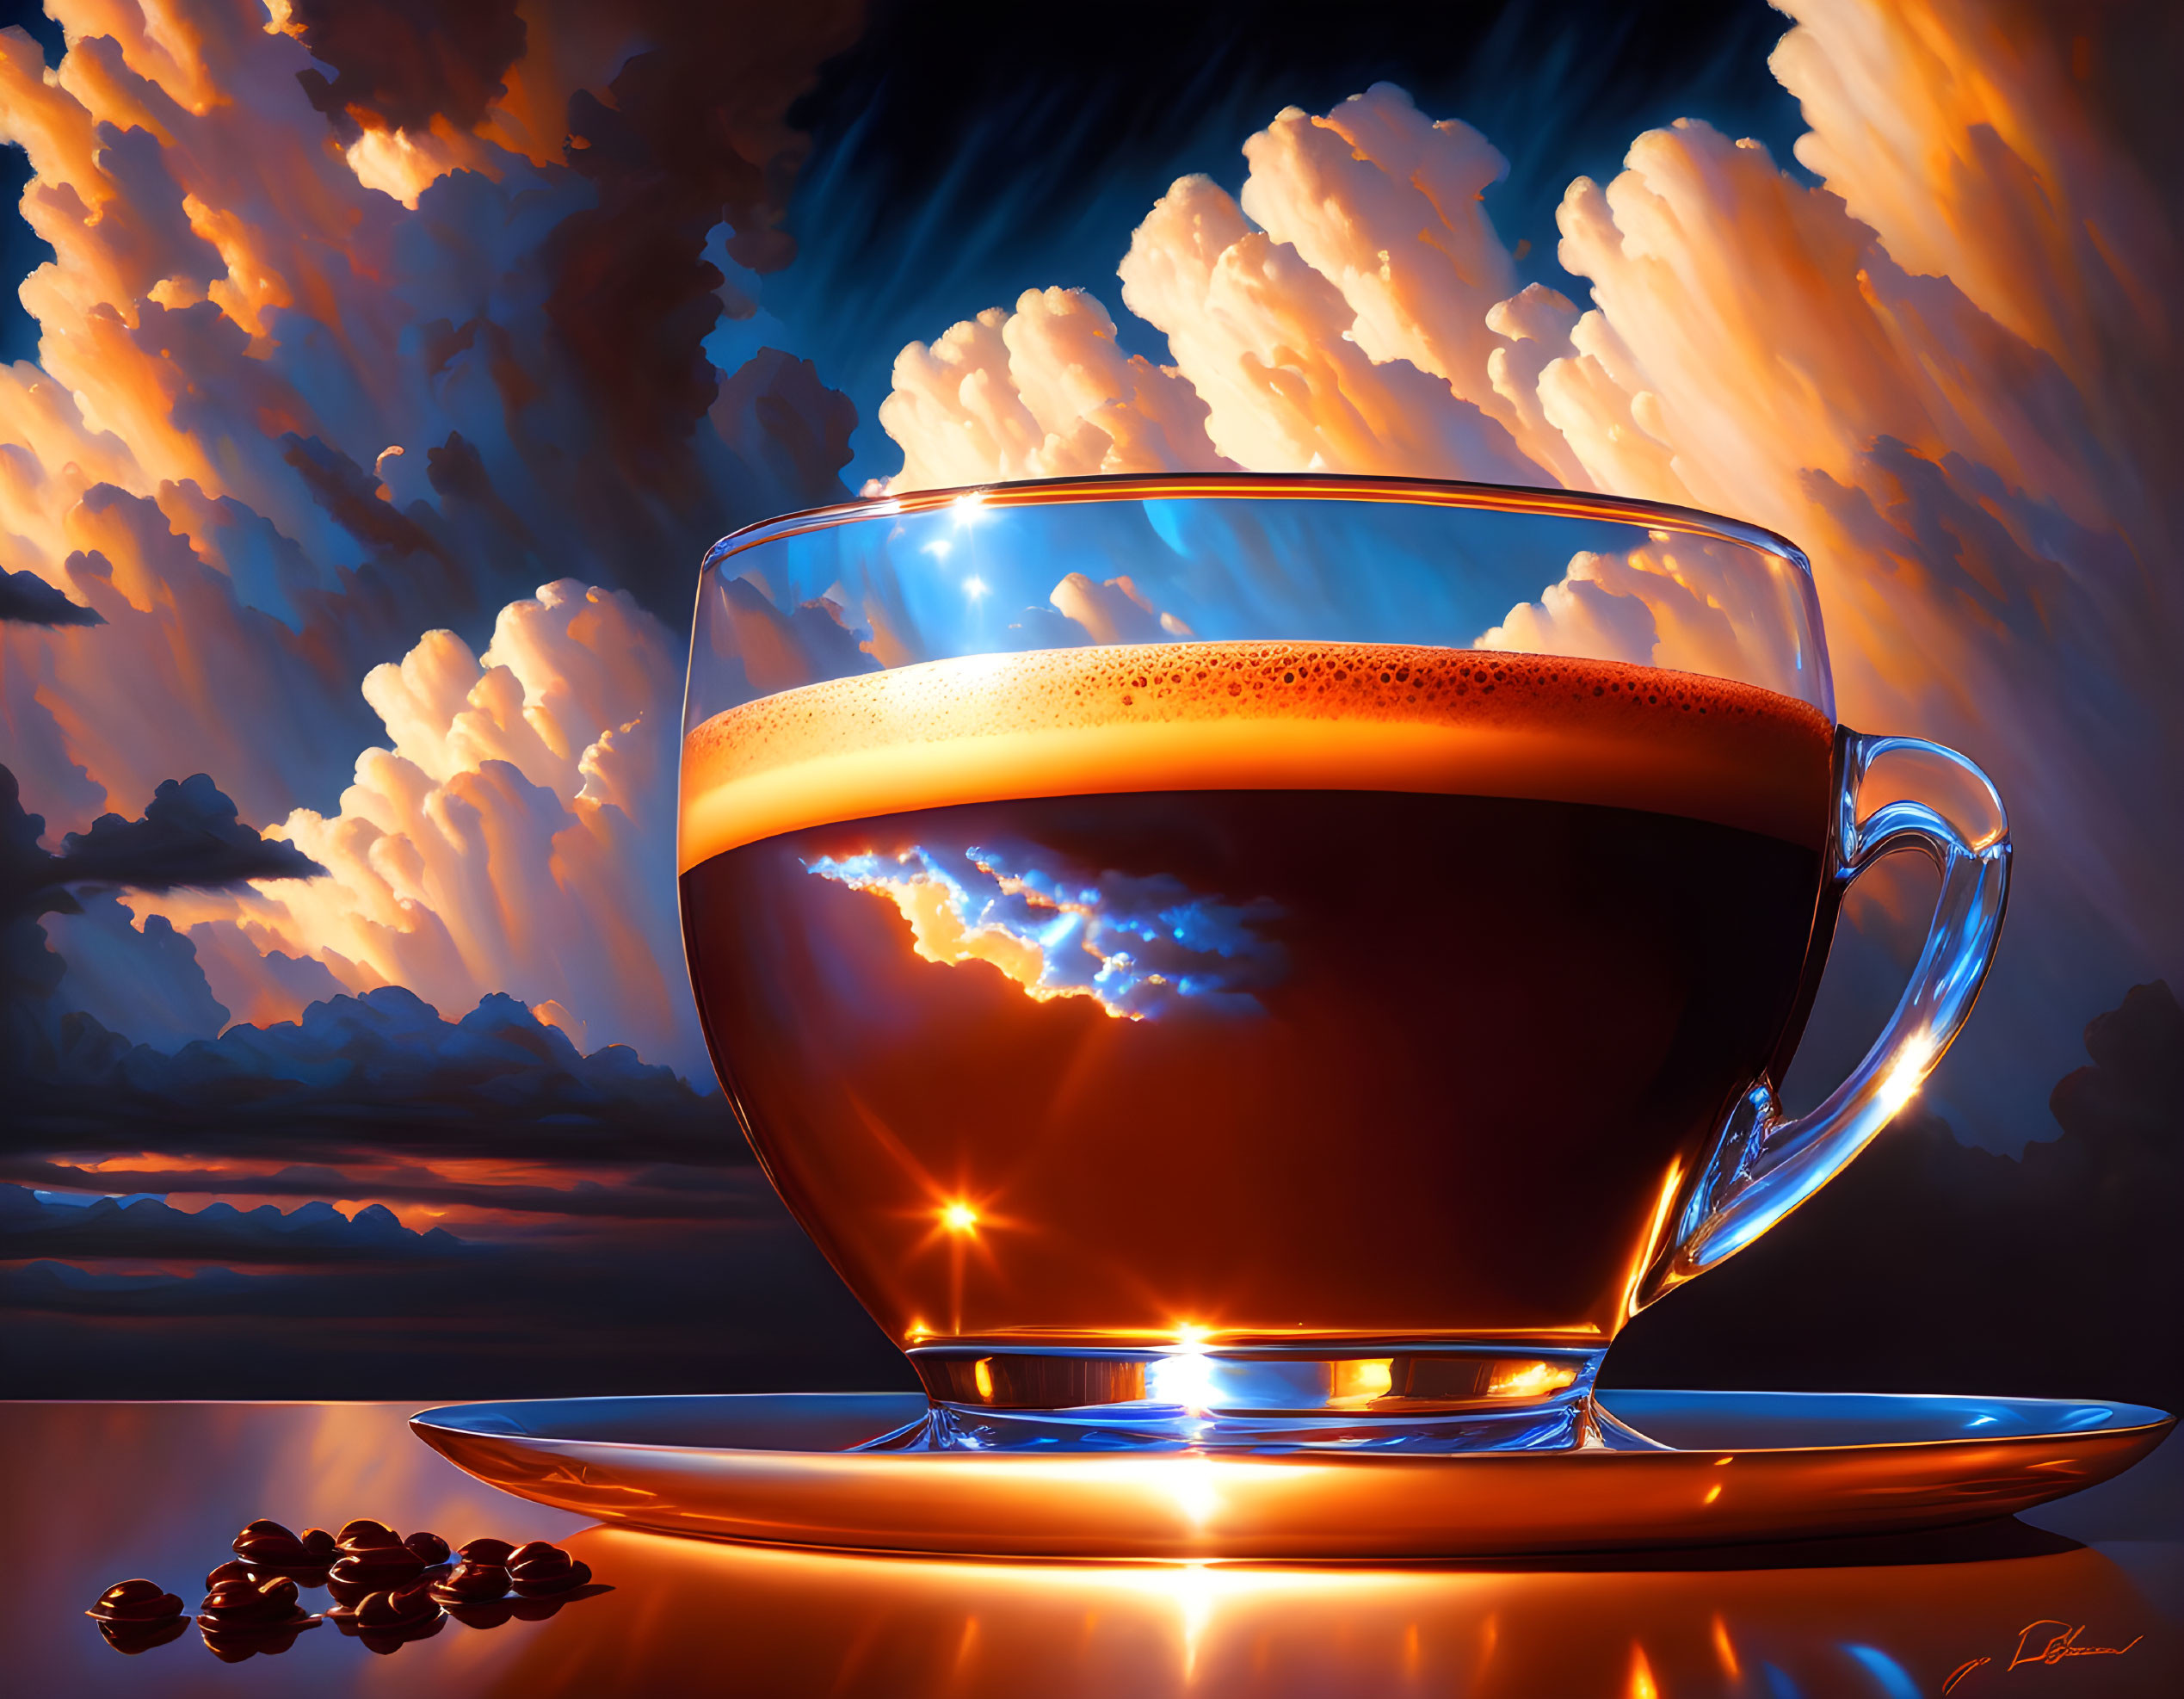 Digital artwork: Oversized coffee cup with sunset sky reflection, clouds, coffee beans, and radiant light